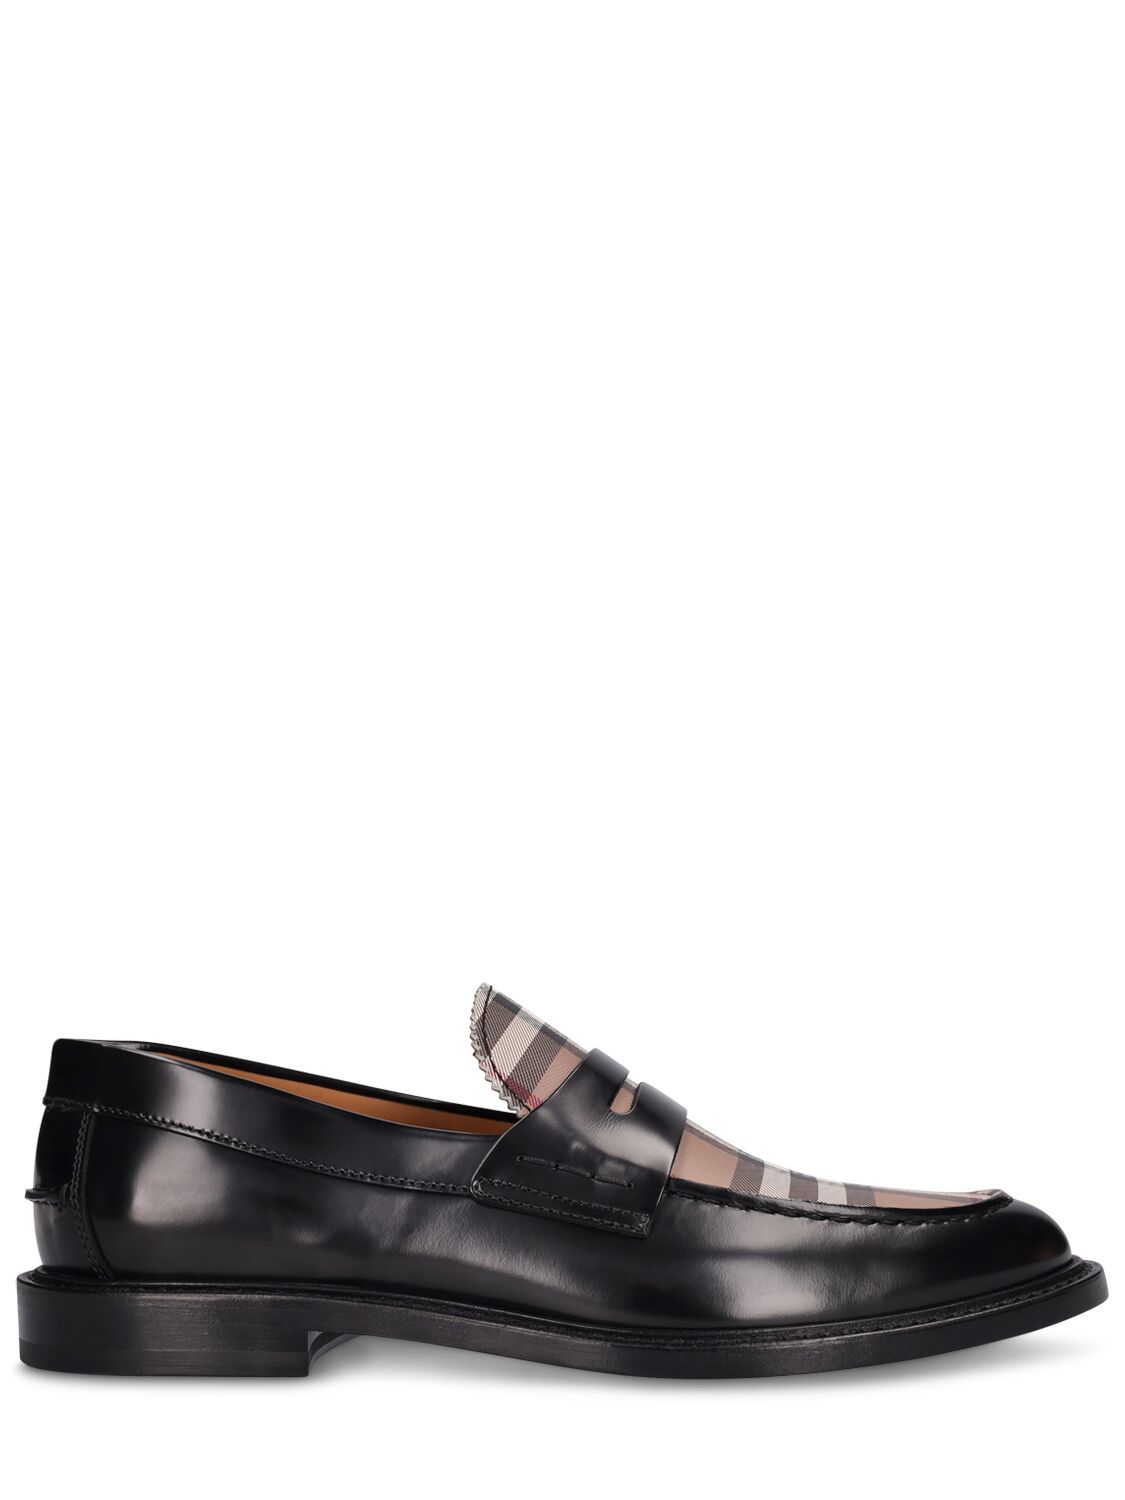 Image of Check Leather Formal Loafers